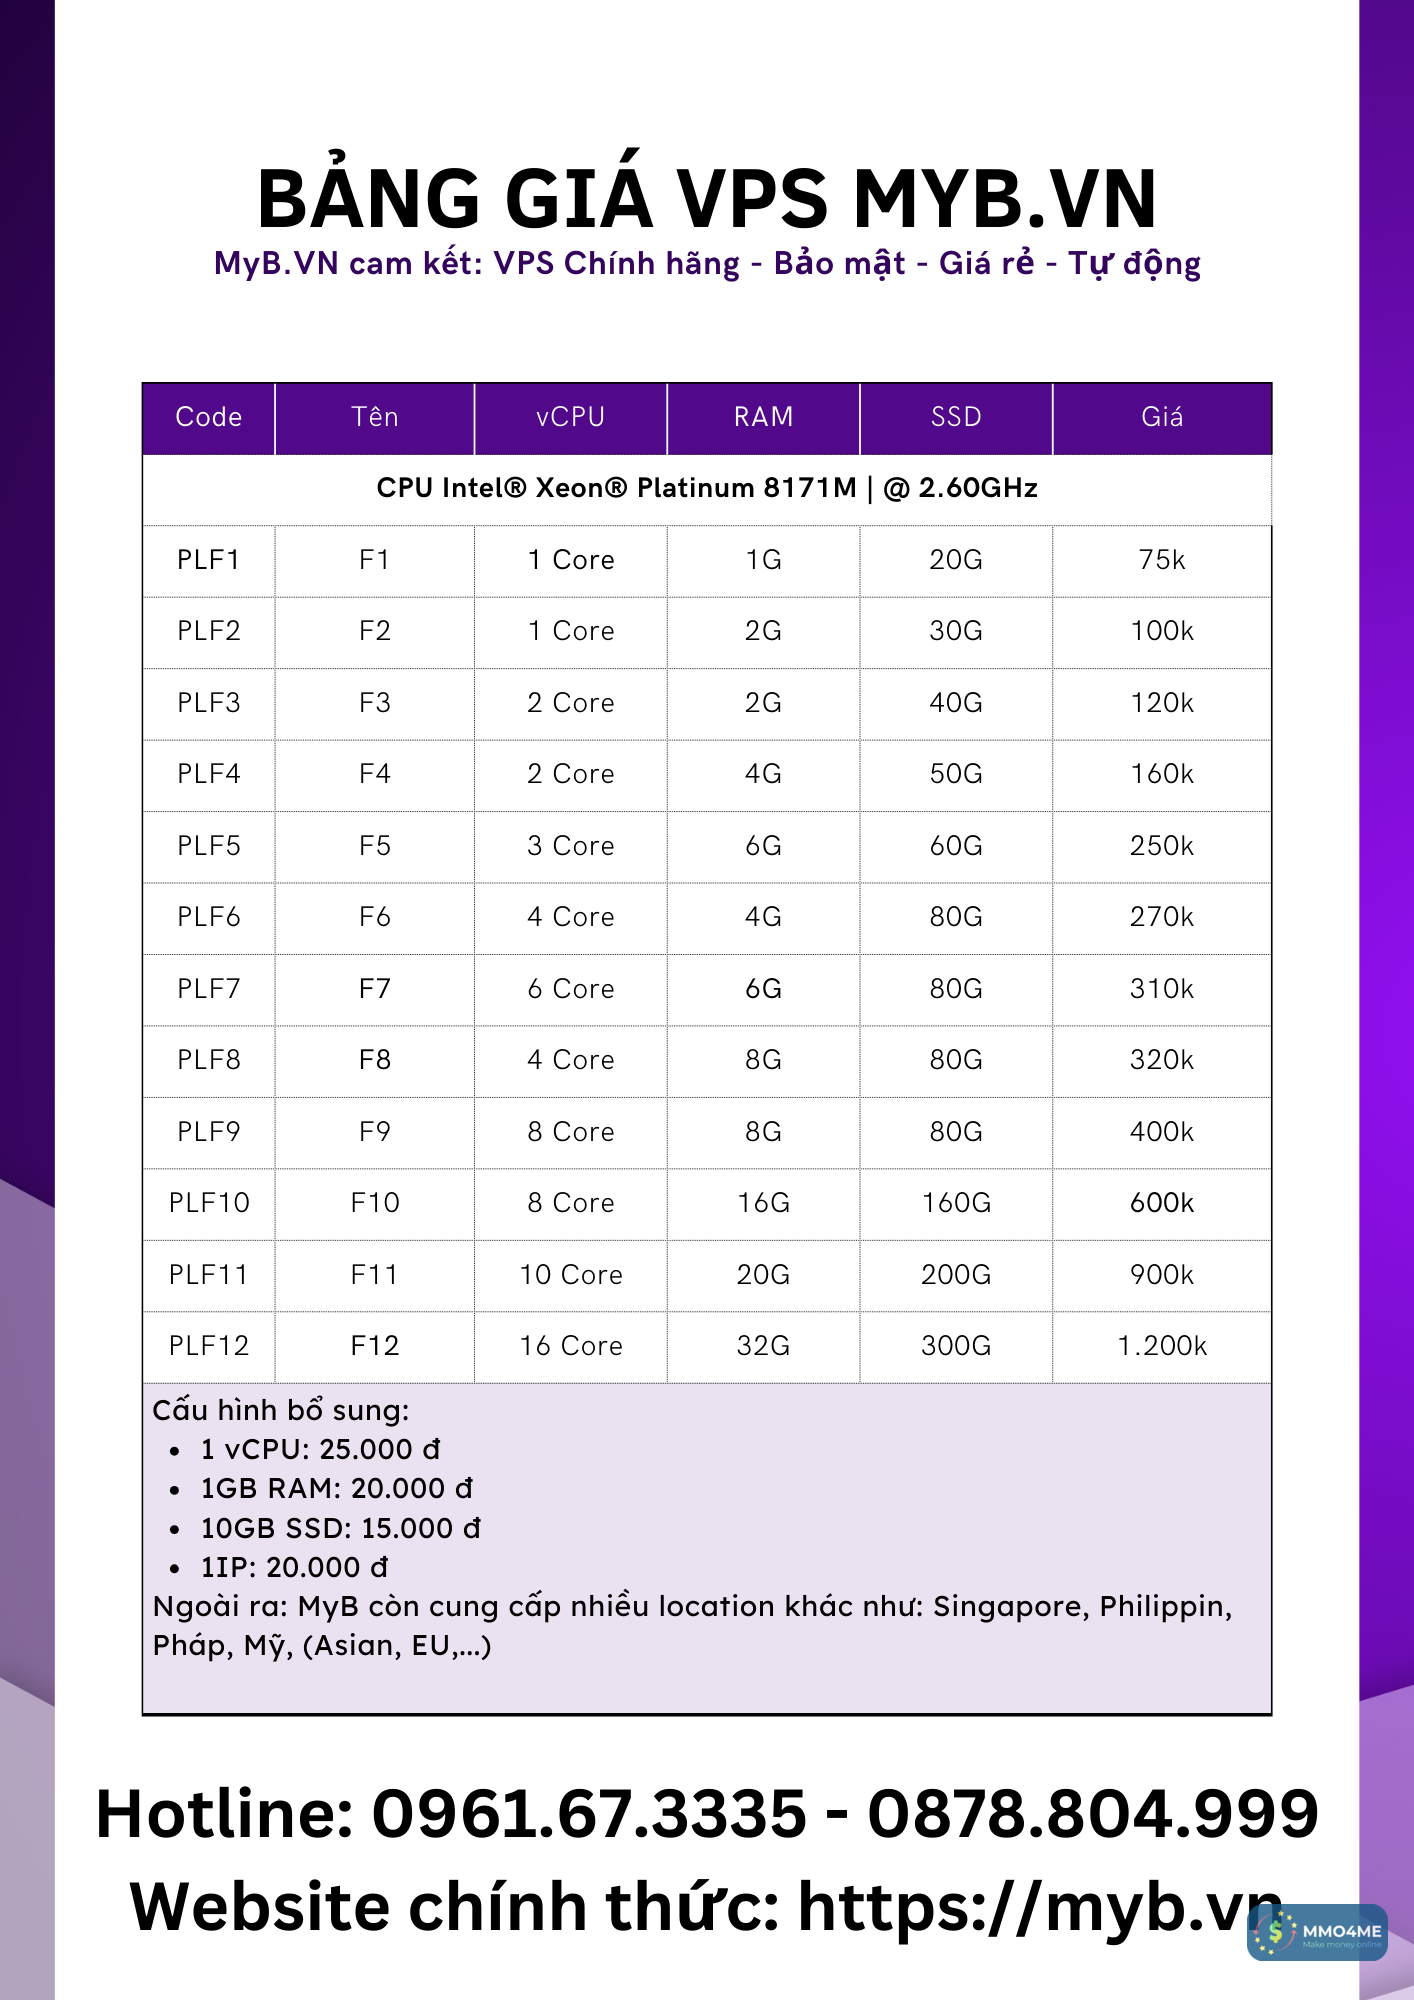 Purple and White Modern Business Product Inventory Table A4 Document.png